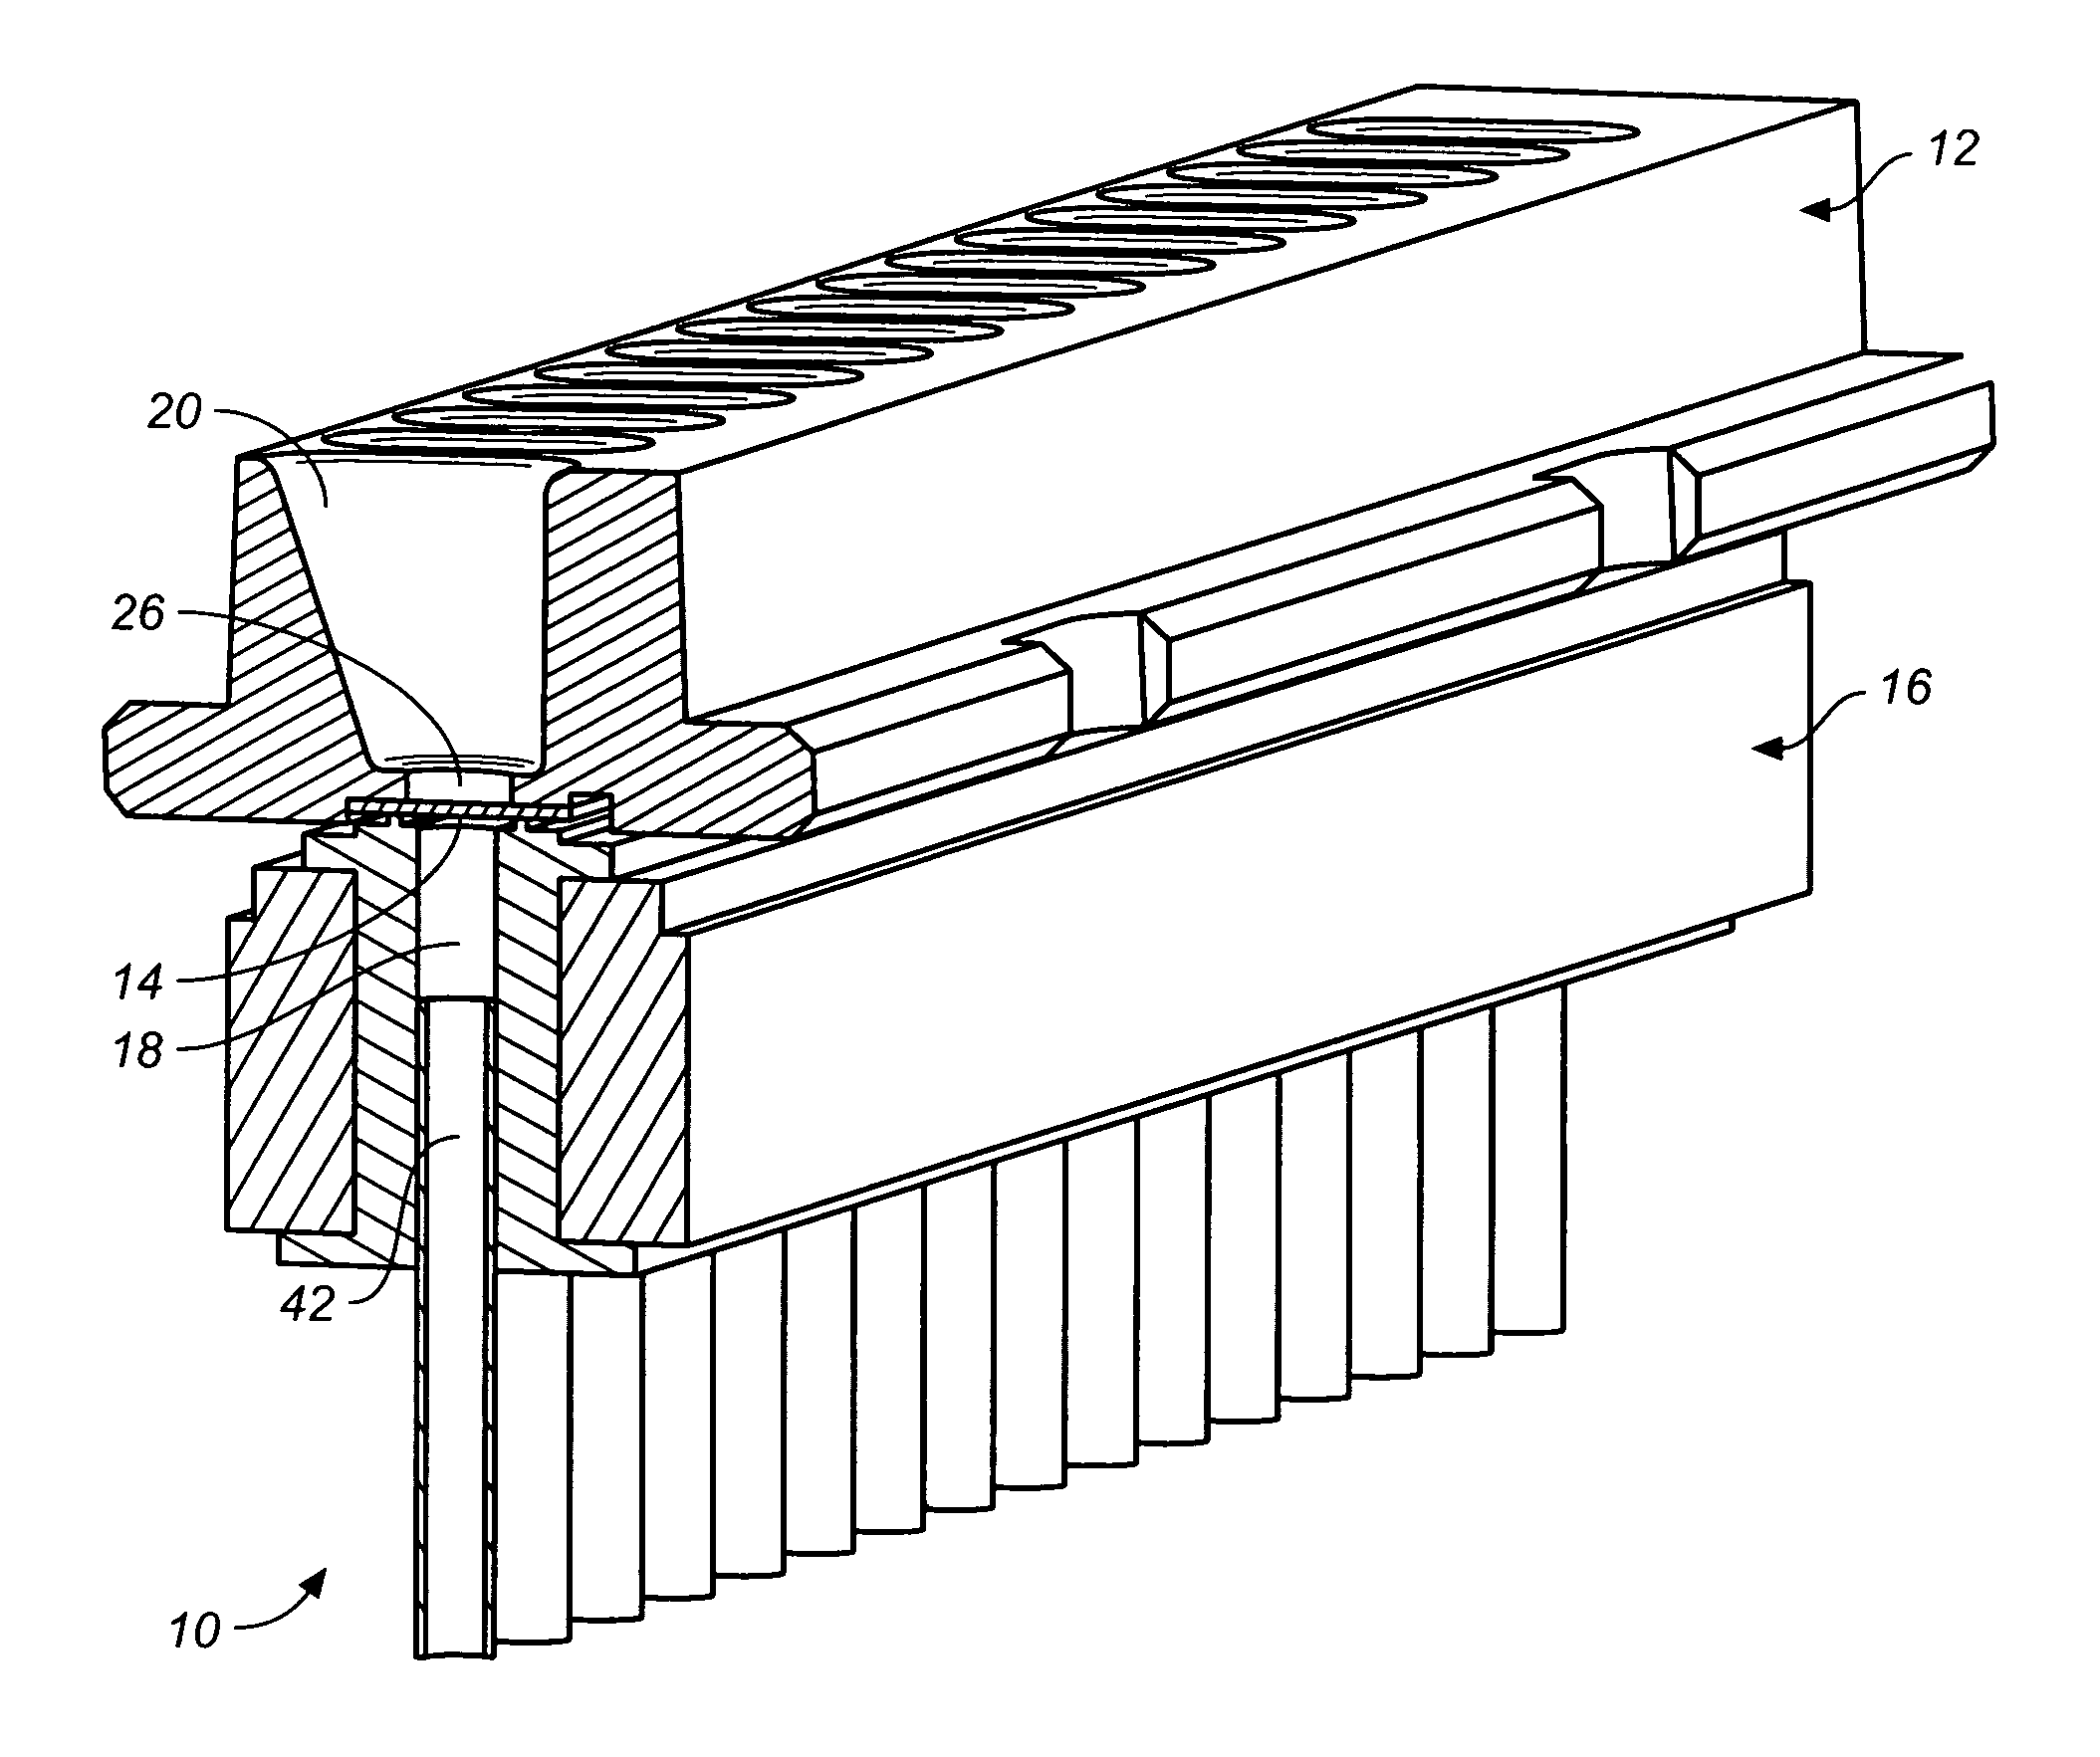 Planar patch-clamp cartridge with integrated electrode